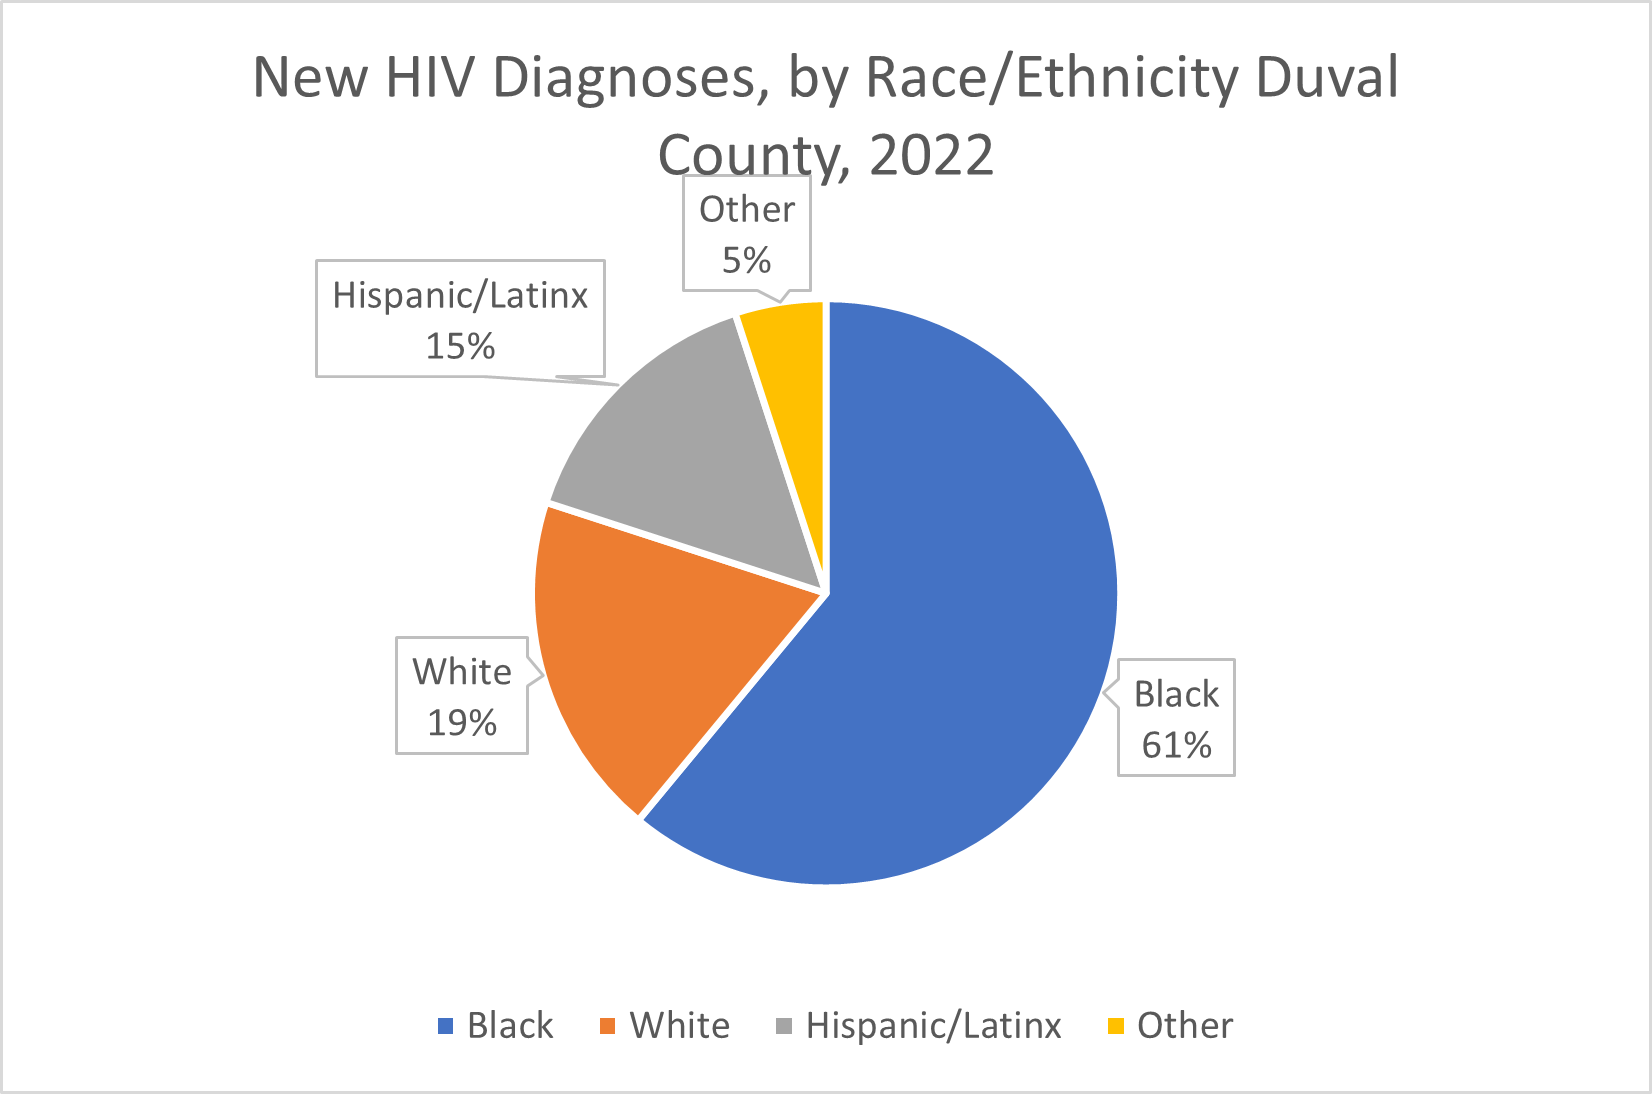 New HIV Diagnoses, by Race/Ethnicity Duval County, 2022